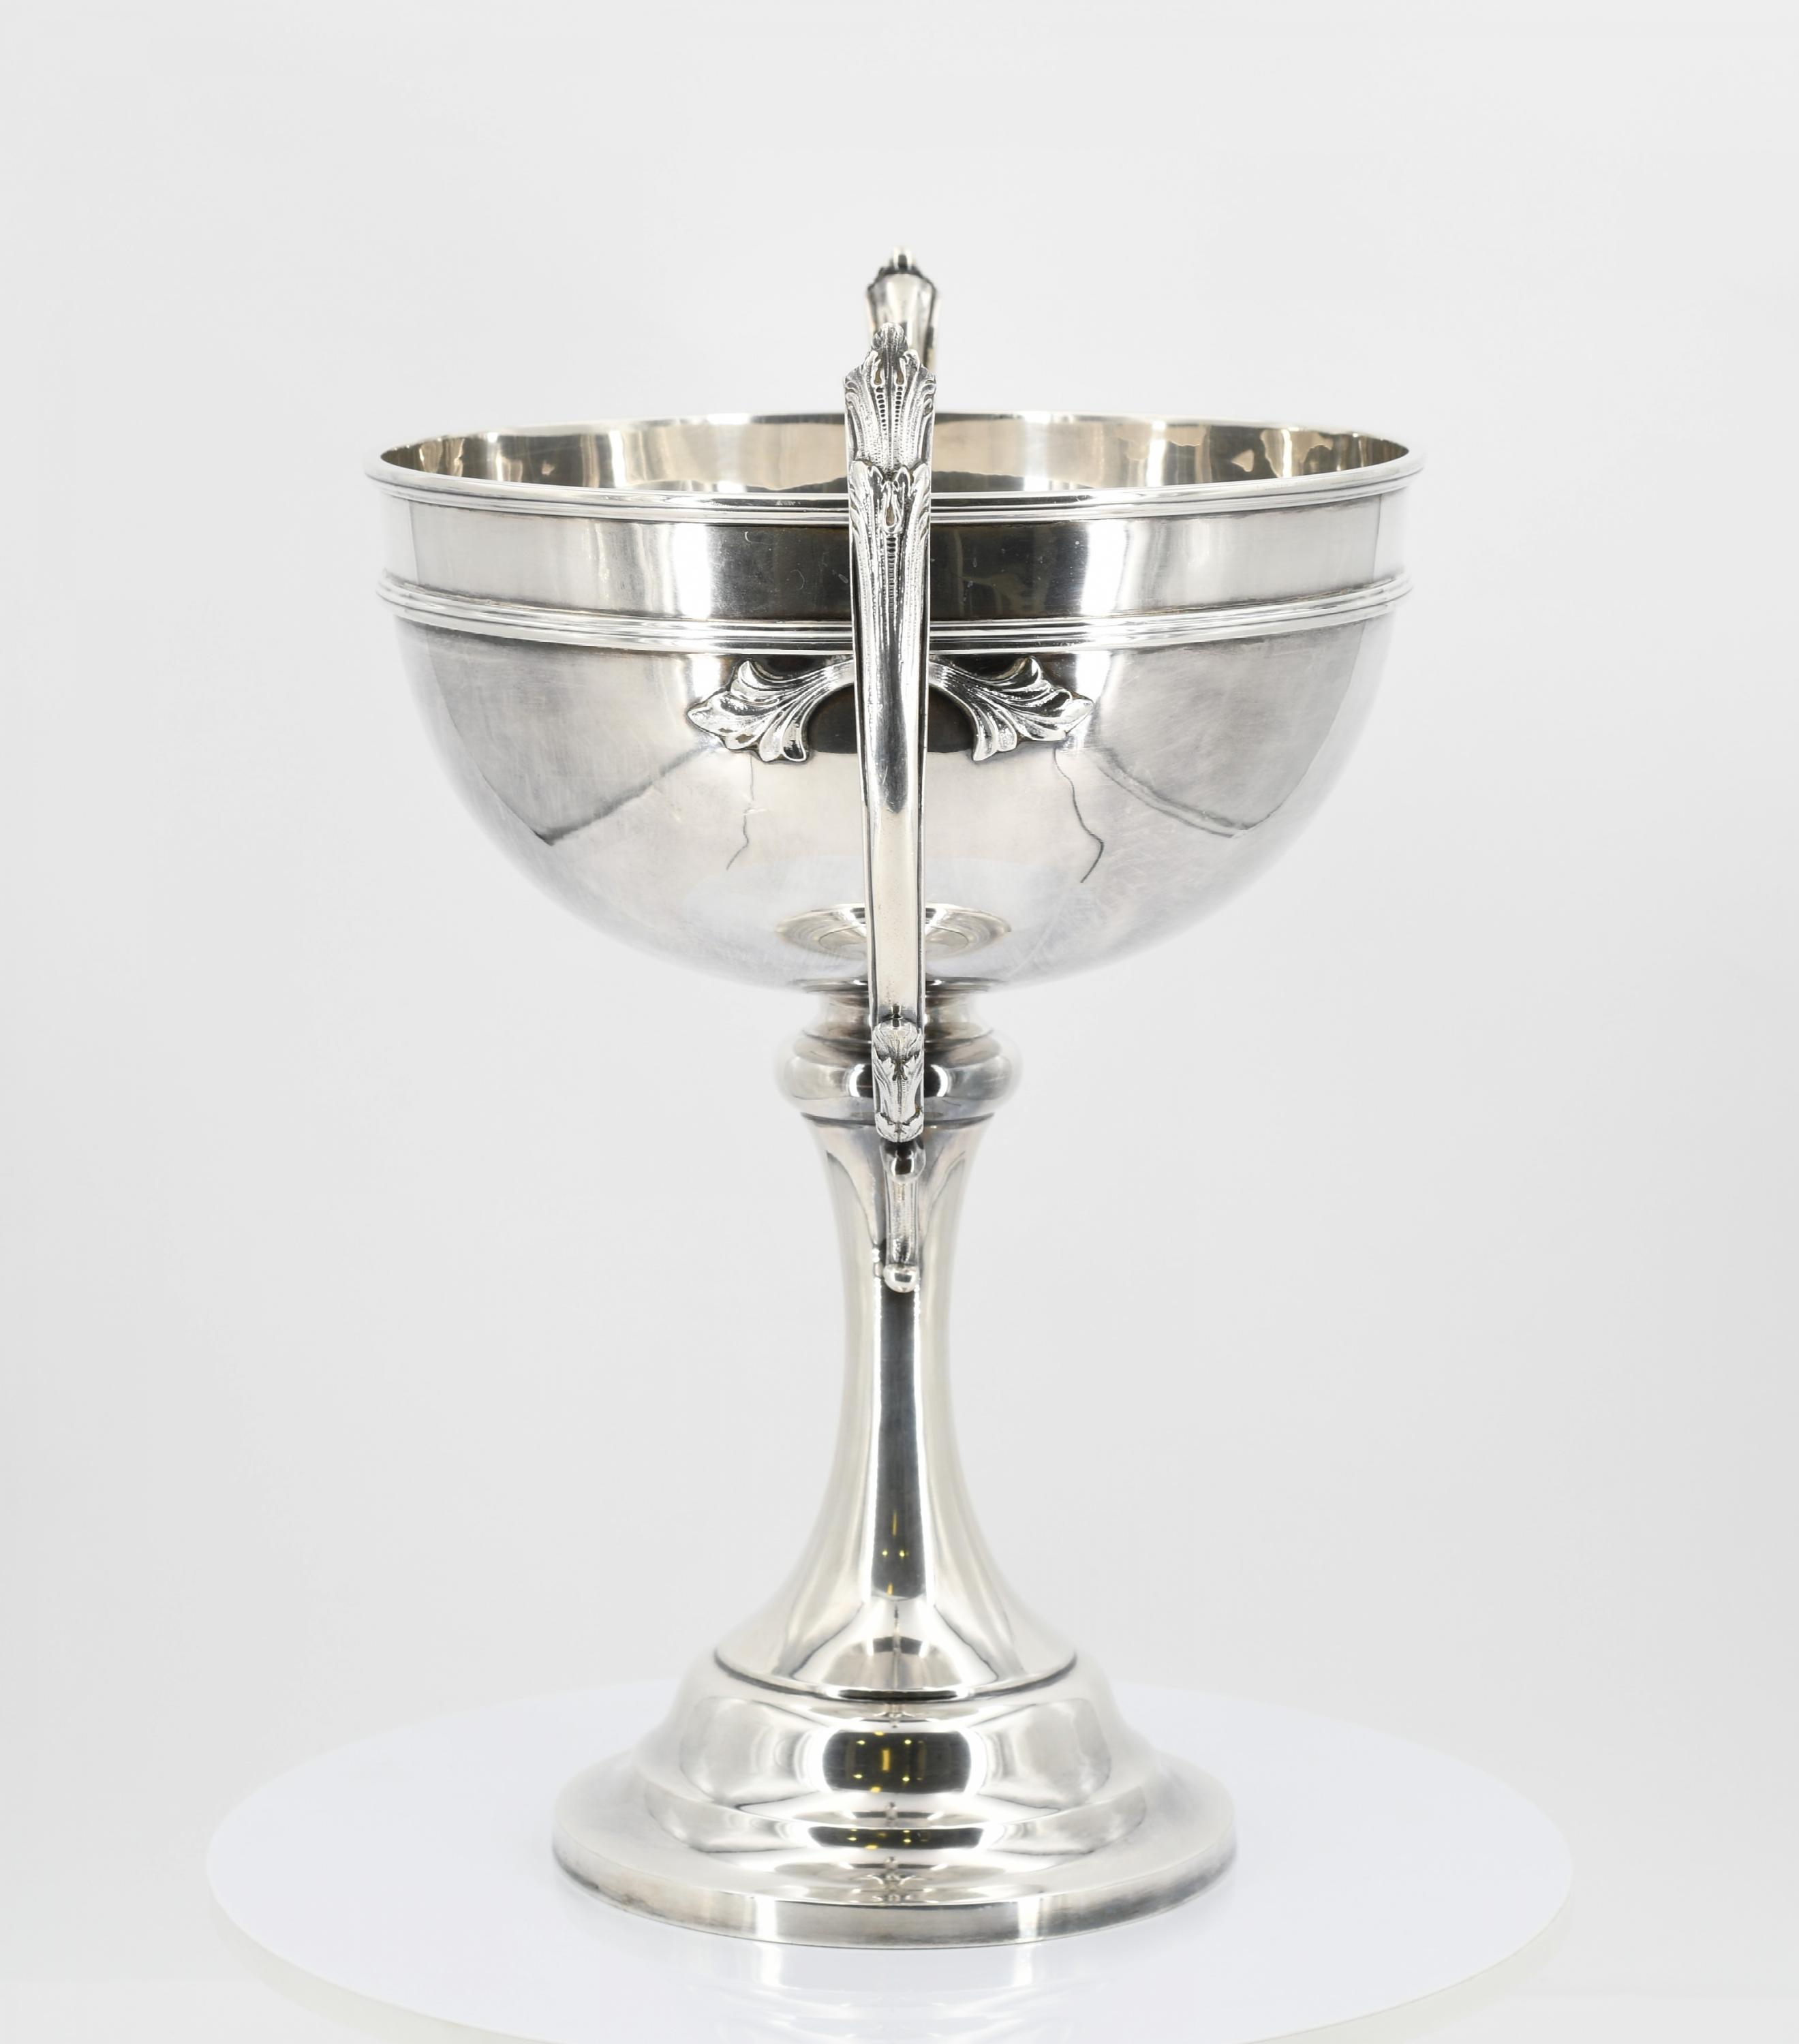 Large George V bowl with handles - Image 2 of 7